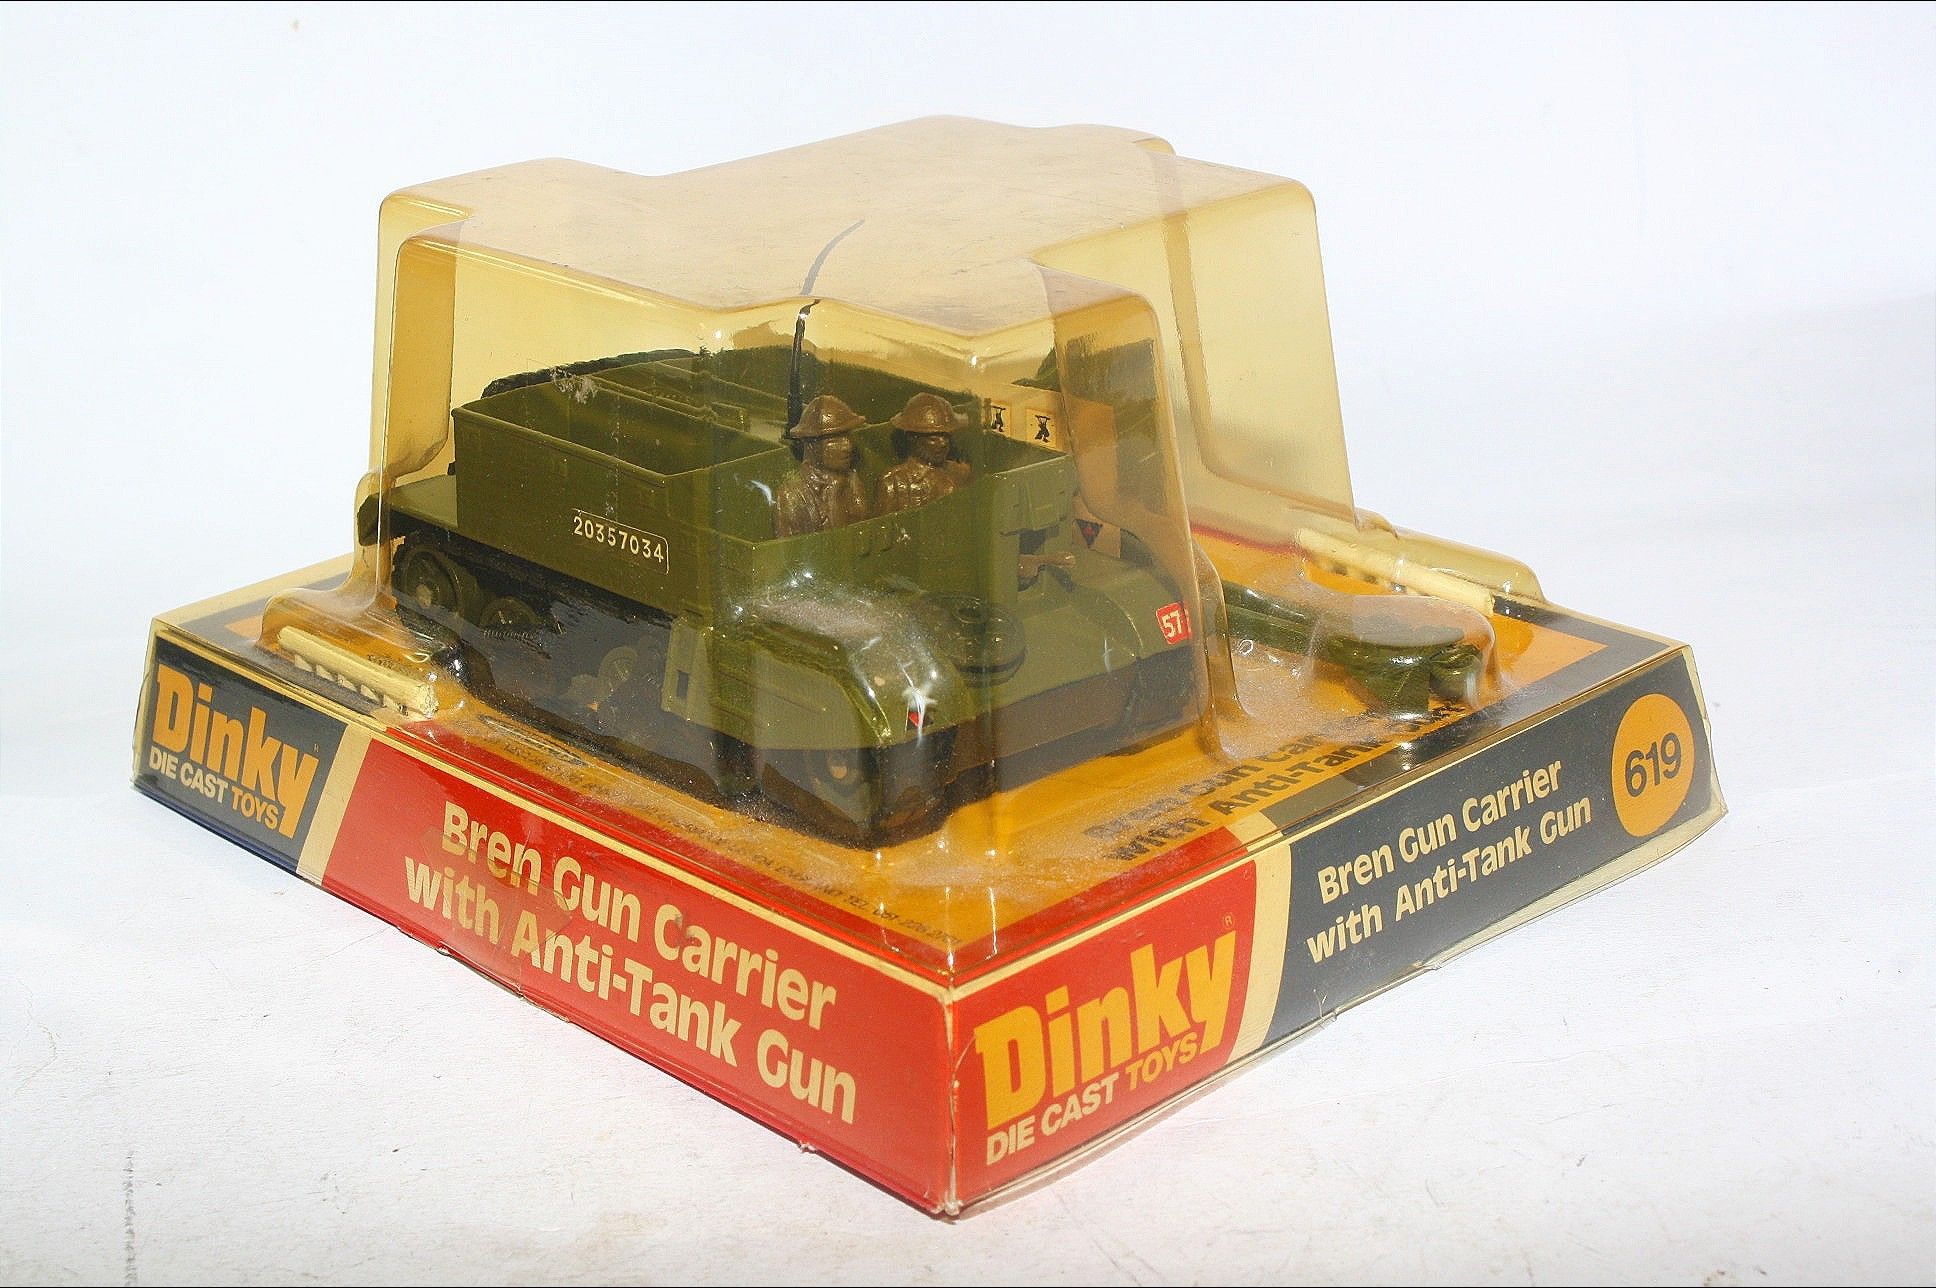 Reproduction Vacuum-Formed 'Bubble' by DRRB Dinky #619 Bren Carrier A/T Gun 